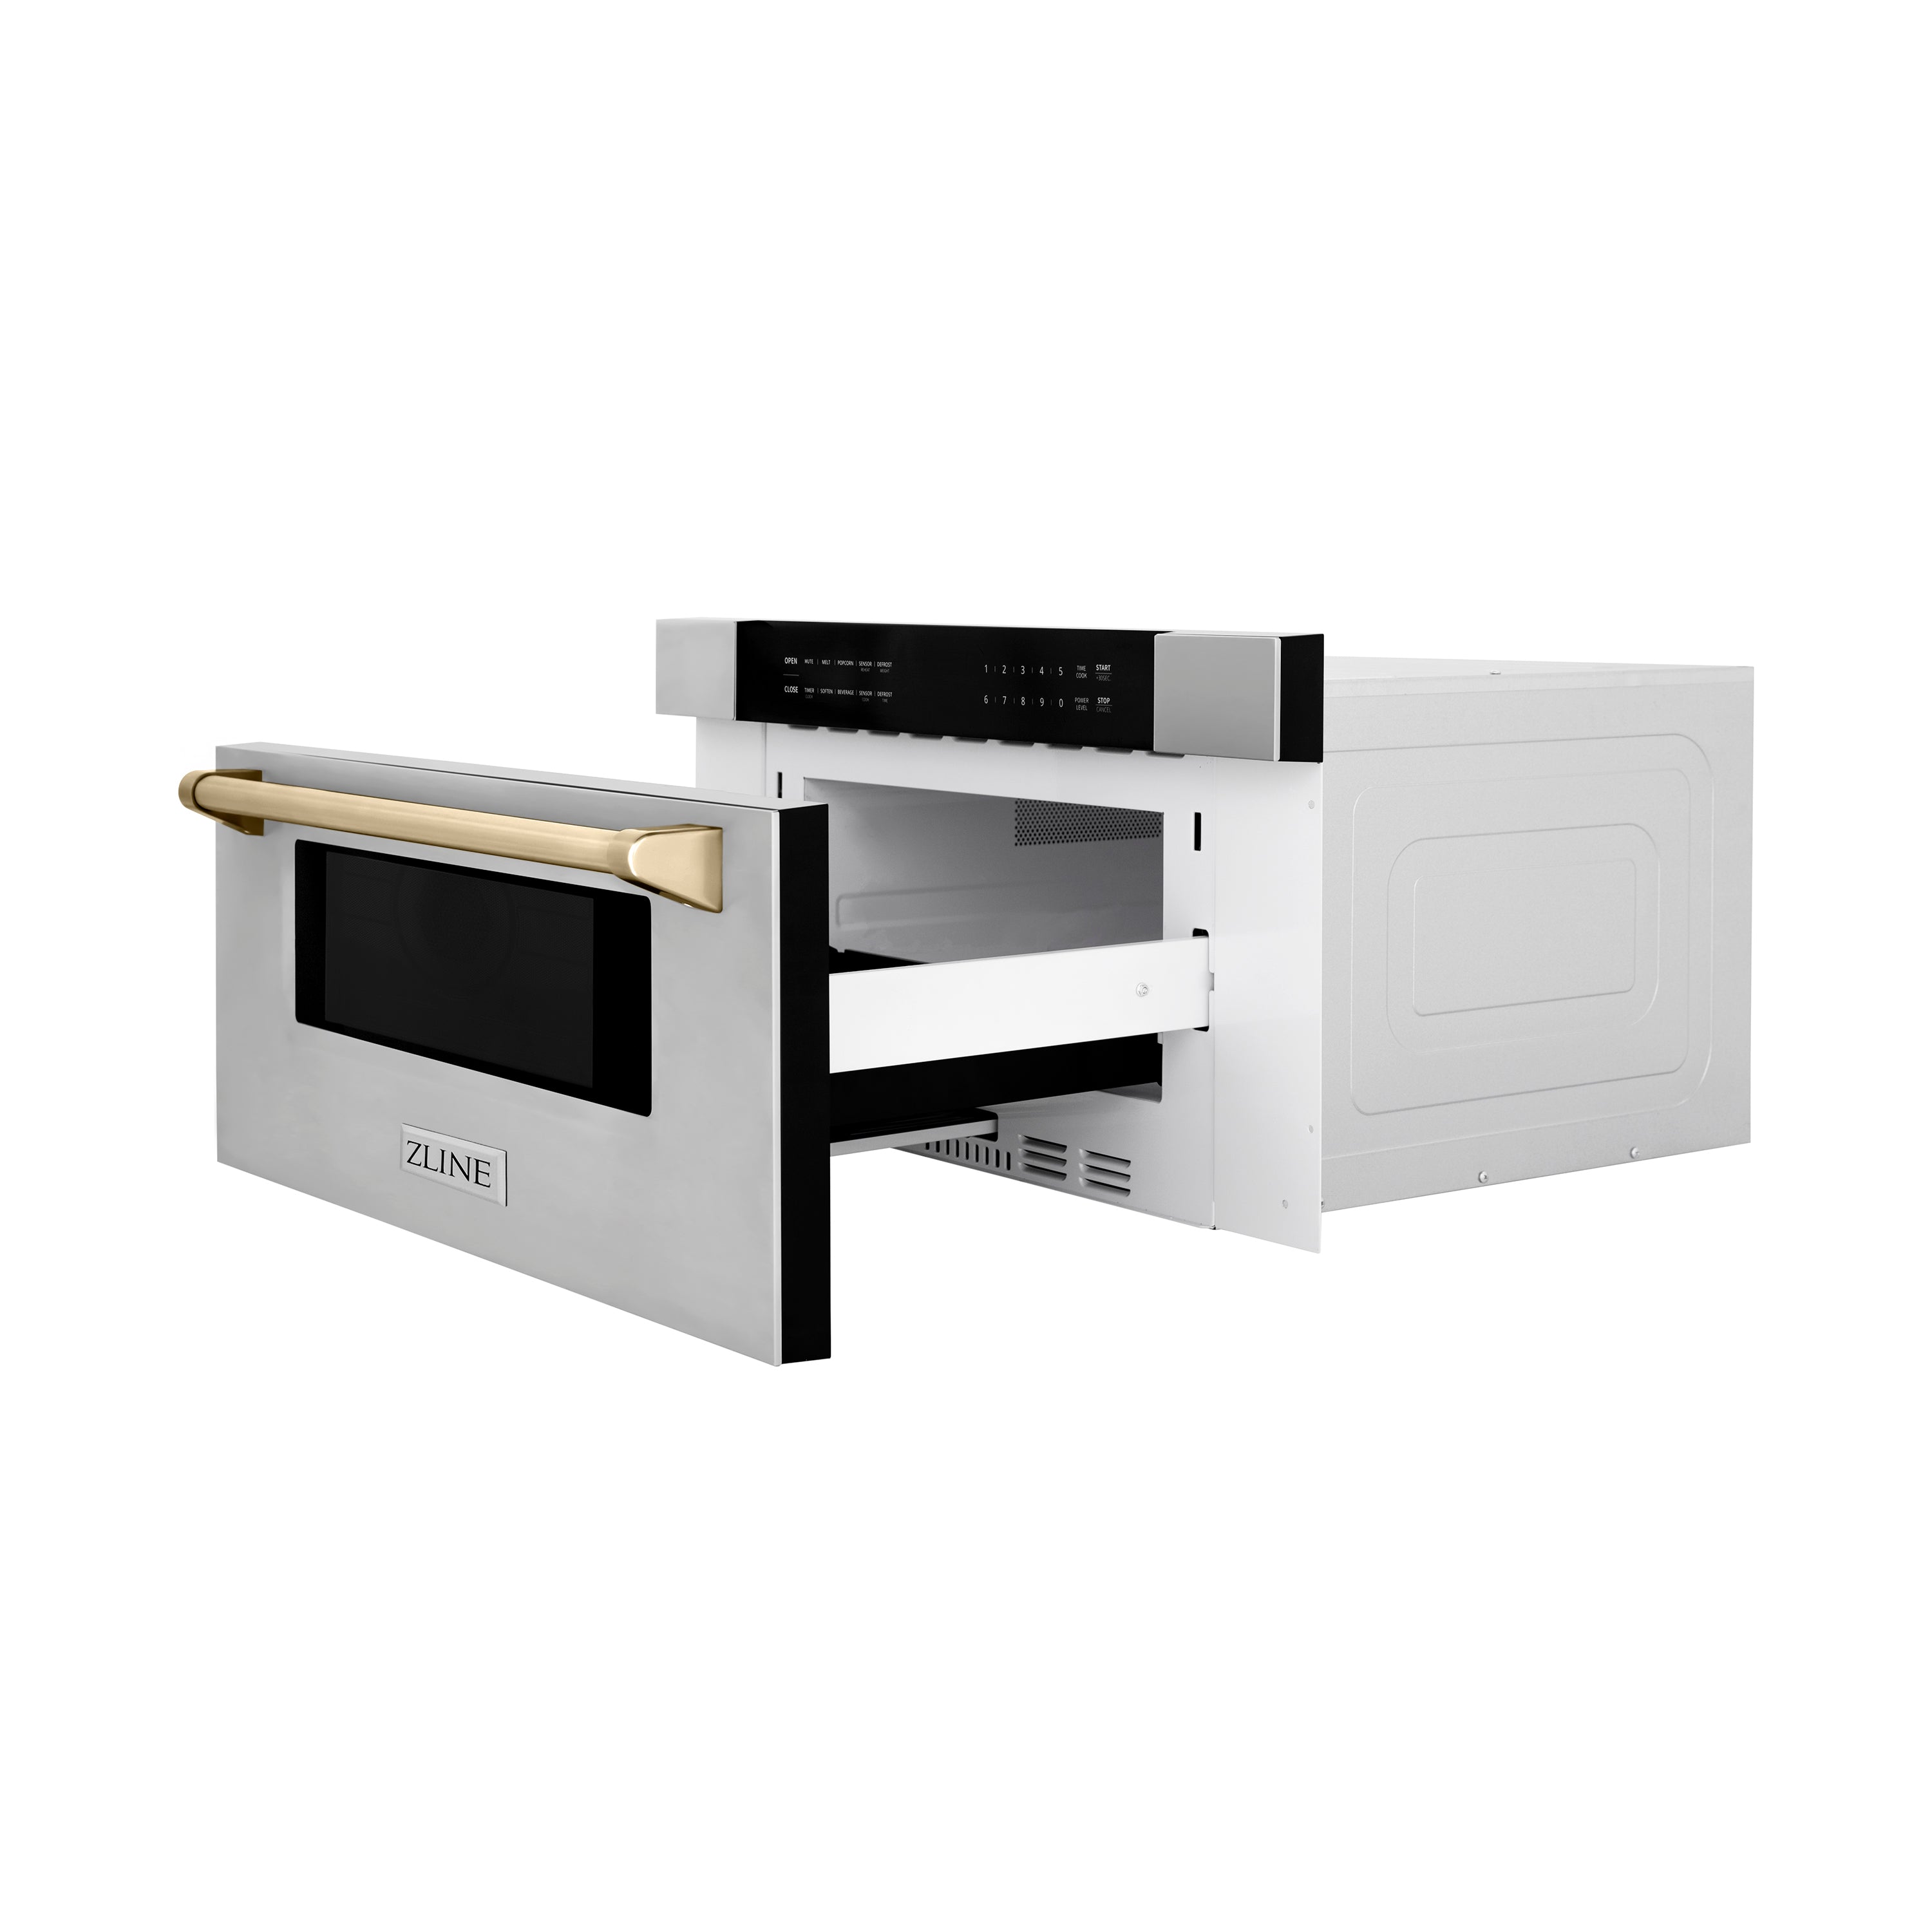 ZLINE Autograph Edition 30" 1.2 cu. ft. Built-In Microwave Drawer in Stainless Steel with Polished Gold Accents